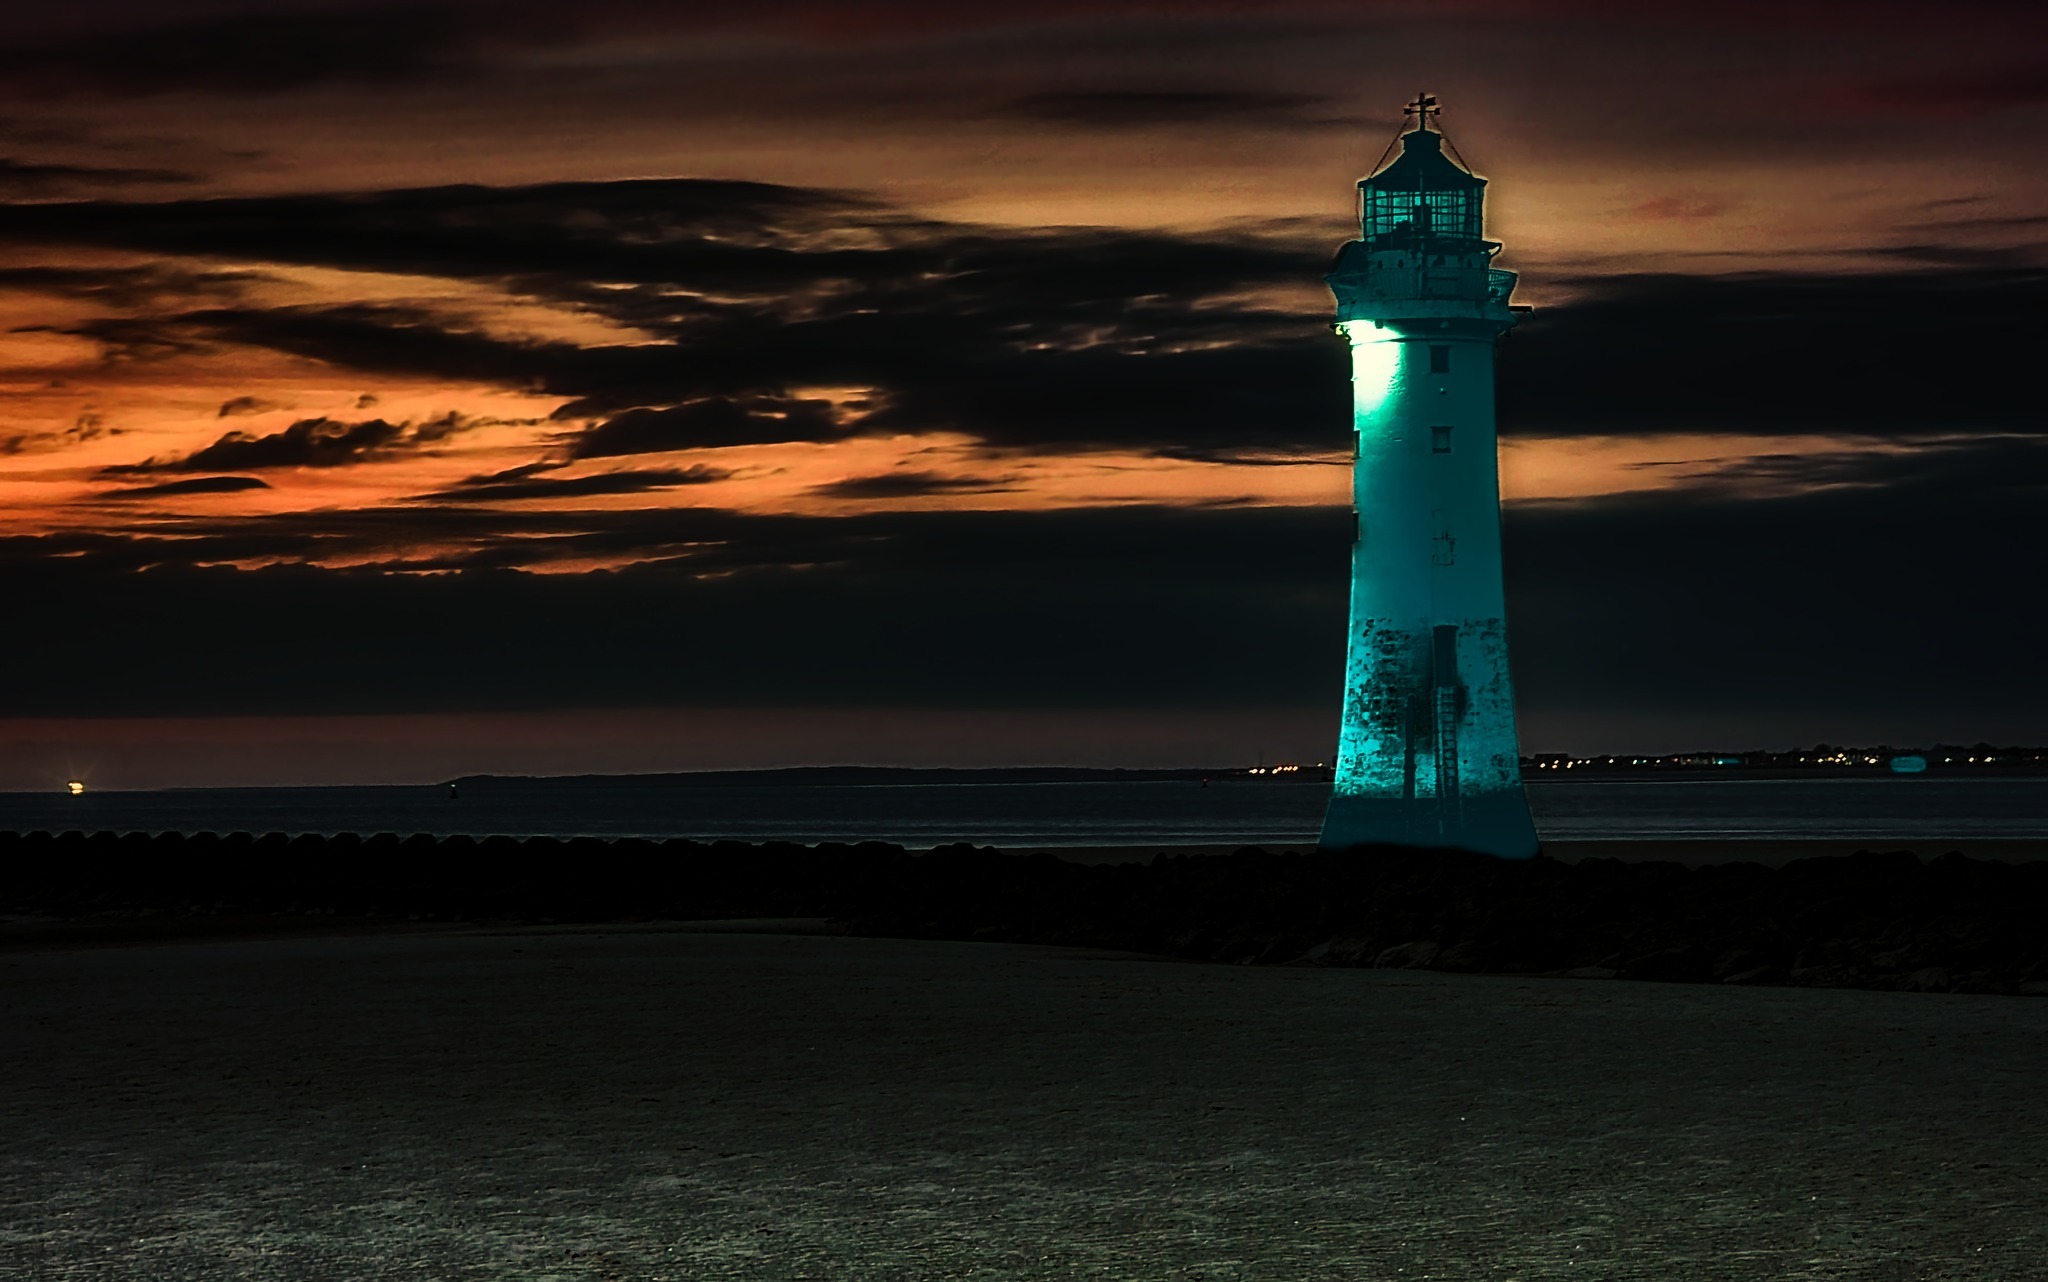 Nightfall at Leasowe lighthouse by Barry Brown